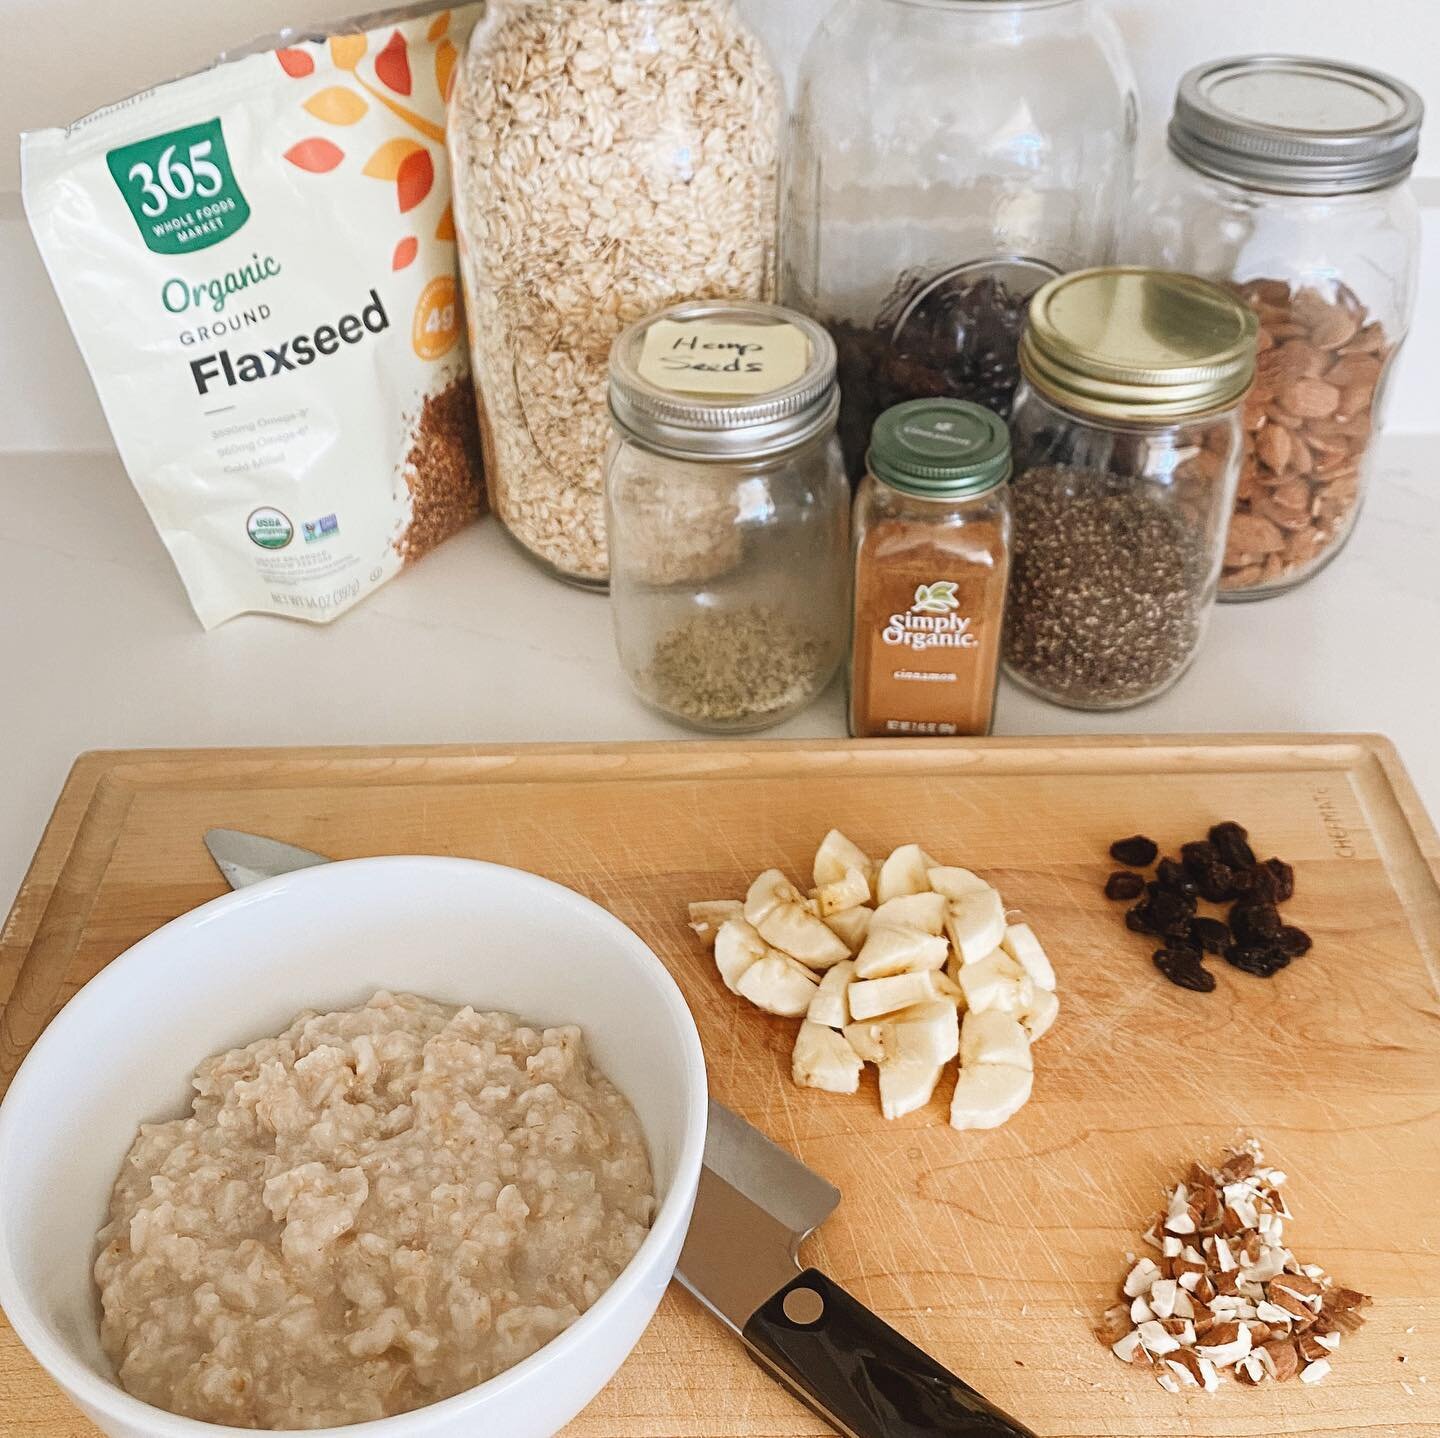 #WorldVeganDayChallenge - Day 12⁠⠀
Category: Vegan Food⁠⠀
⁠⠀
🌿 Fast &amp; easy vegan breakfast &ldquo;Power Oats&rdquo;! 🌿⁠⠀
⁠⠀
Here&rsquo;s a quick and easy way to prepare oatmeal, without dairy or processed sugar, that is so satisfying and nutrit